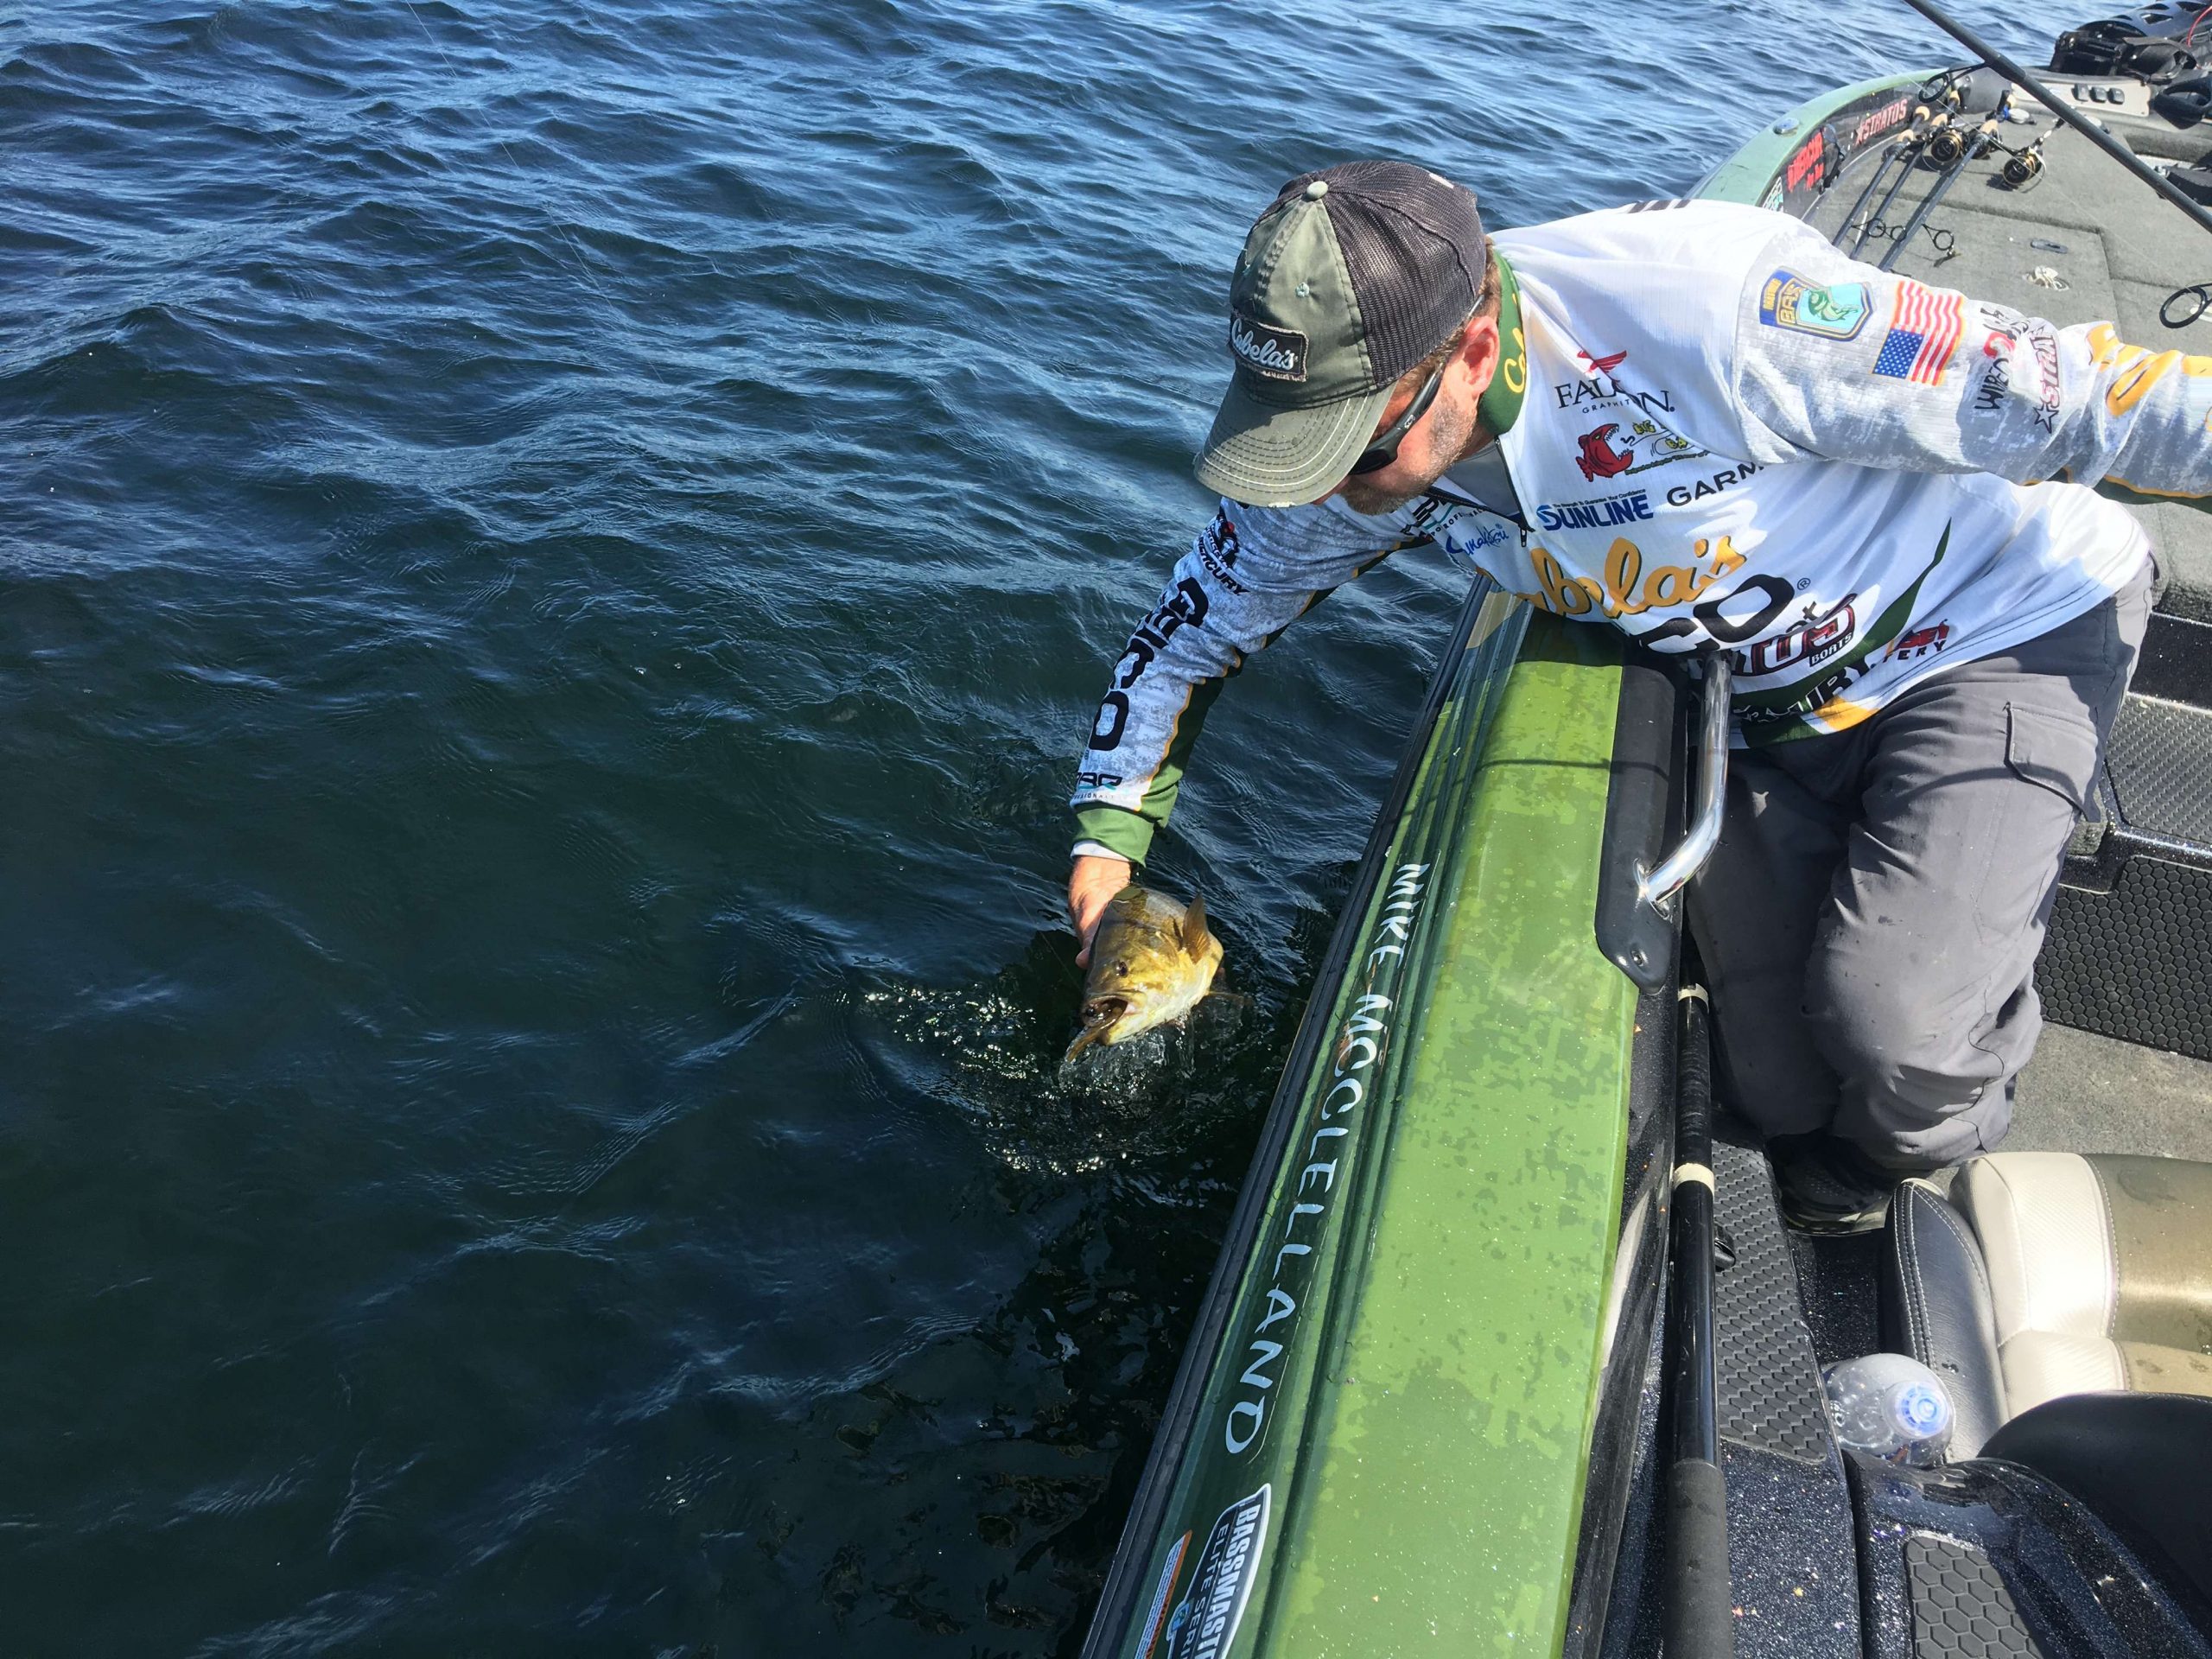 Mike McClelland keeps chipping away with another keeper smallie.